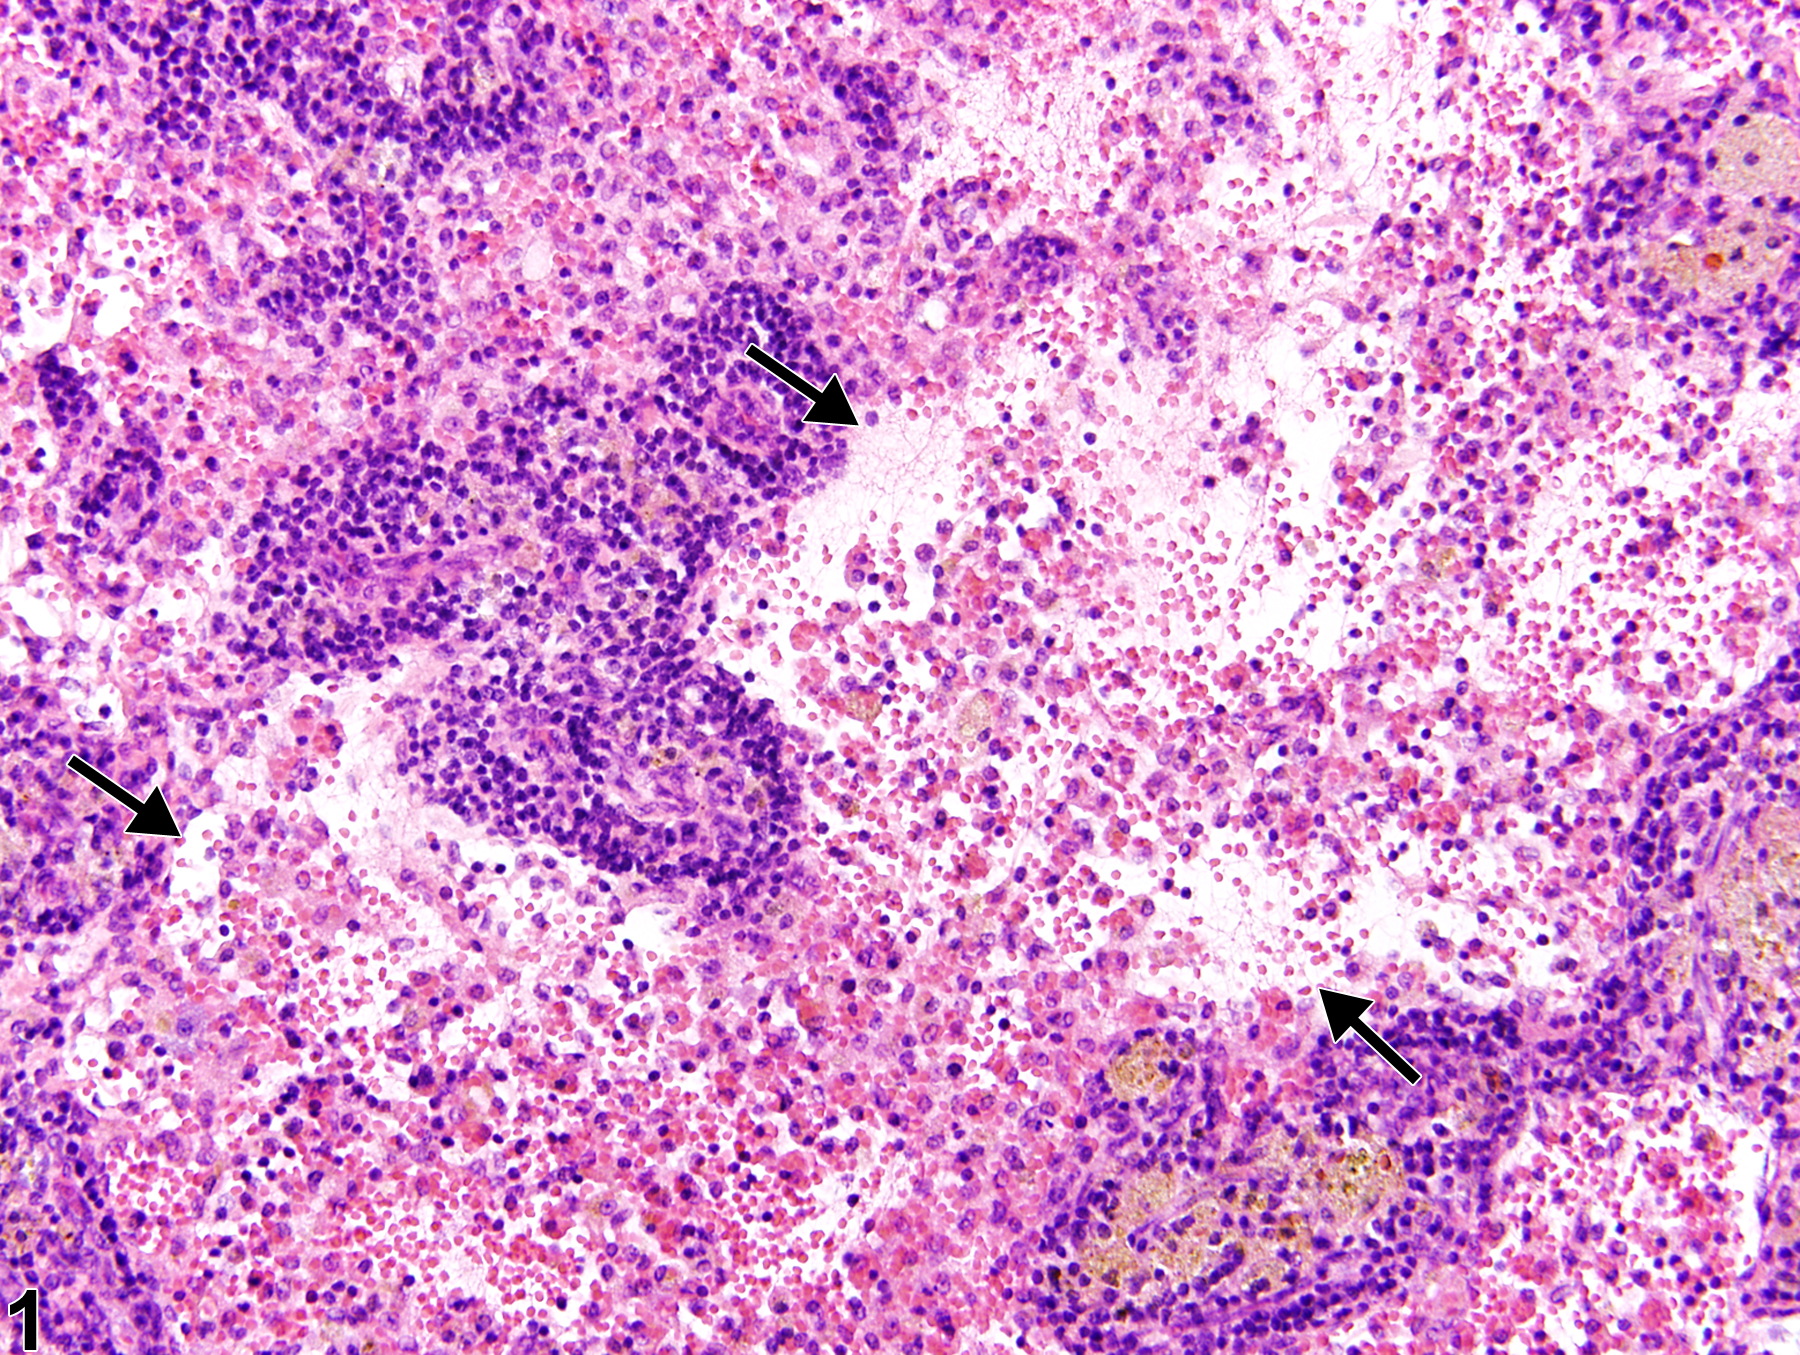 Image of erythrophagocytosis in the lymph node from a female F344/N rat in a chronic study